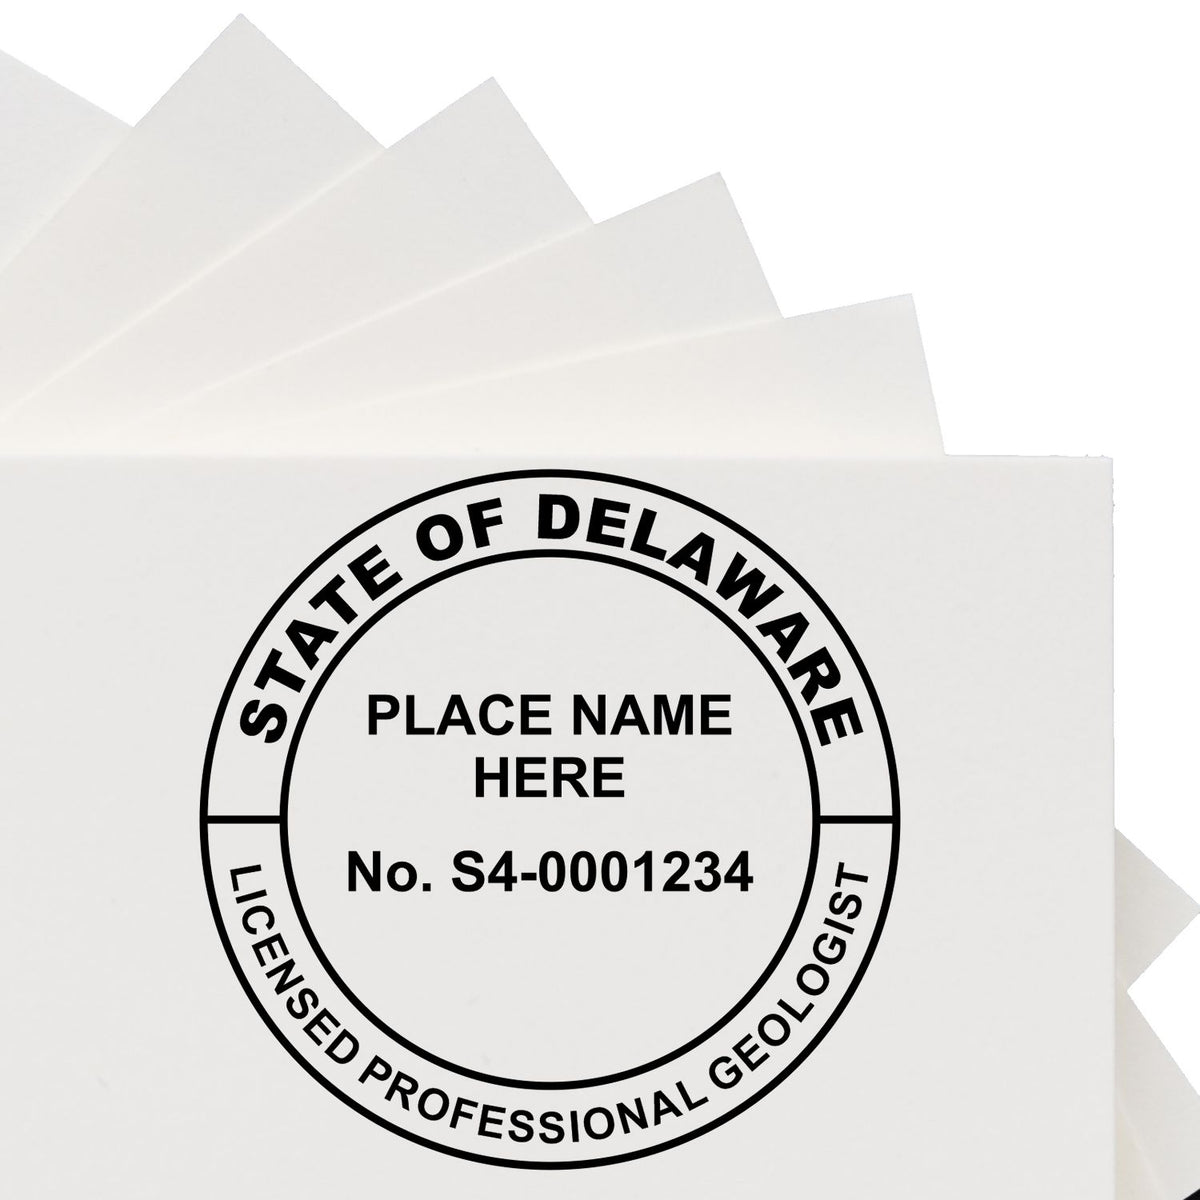 This paper is stamped with a sample imprint of the Premium MaxLight Pre-Inked Delaware Geology Stamp, signifying its quality and reliability.